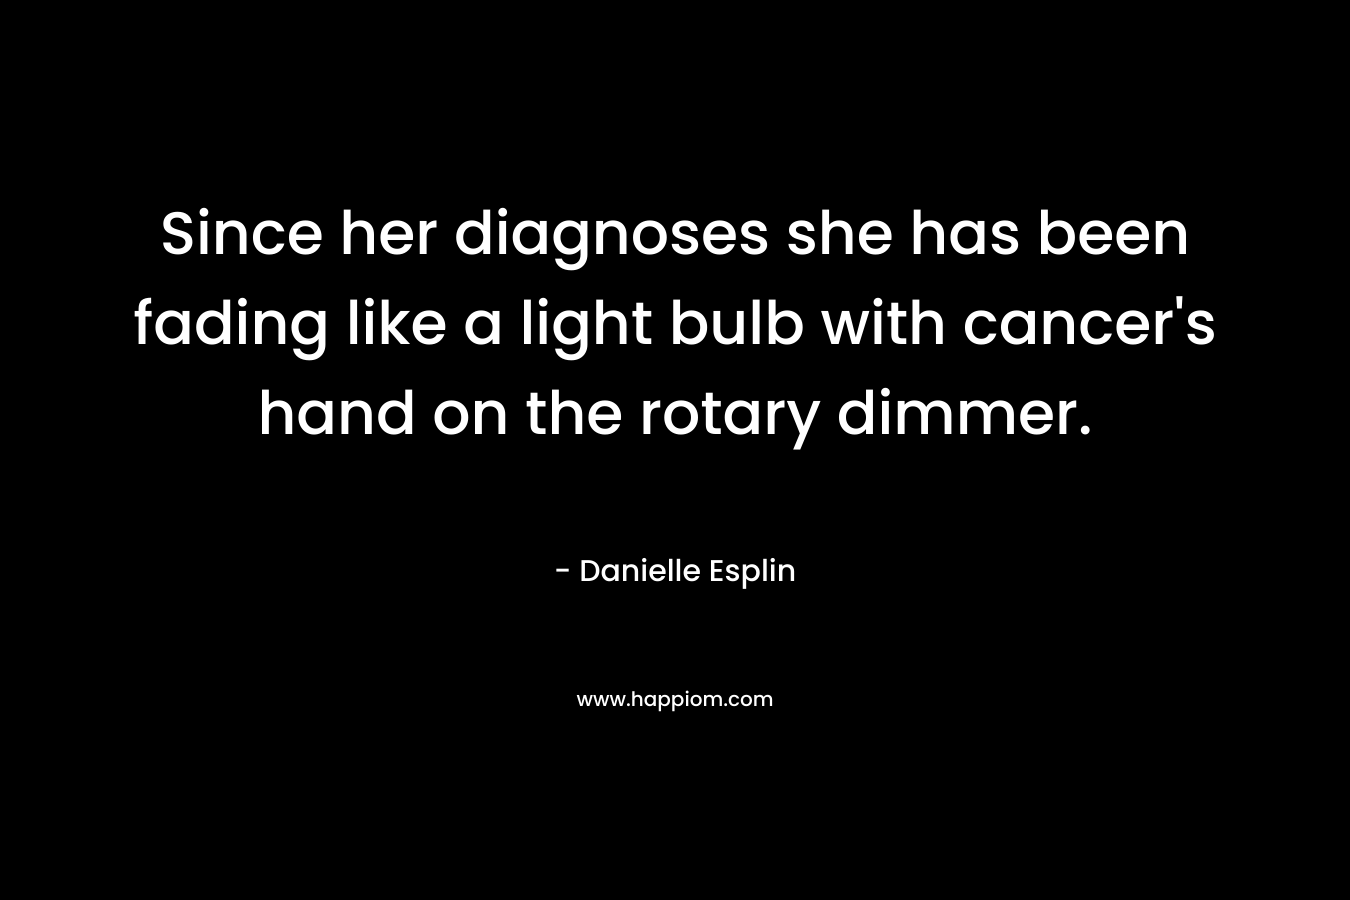 Since her diagnoses she has been fading like a light bulb with cancer’s hand on the rotary dimmer. – Danielle Esplin